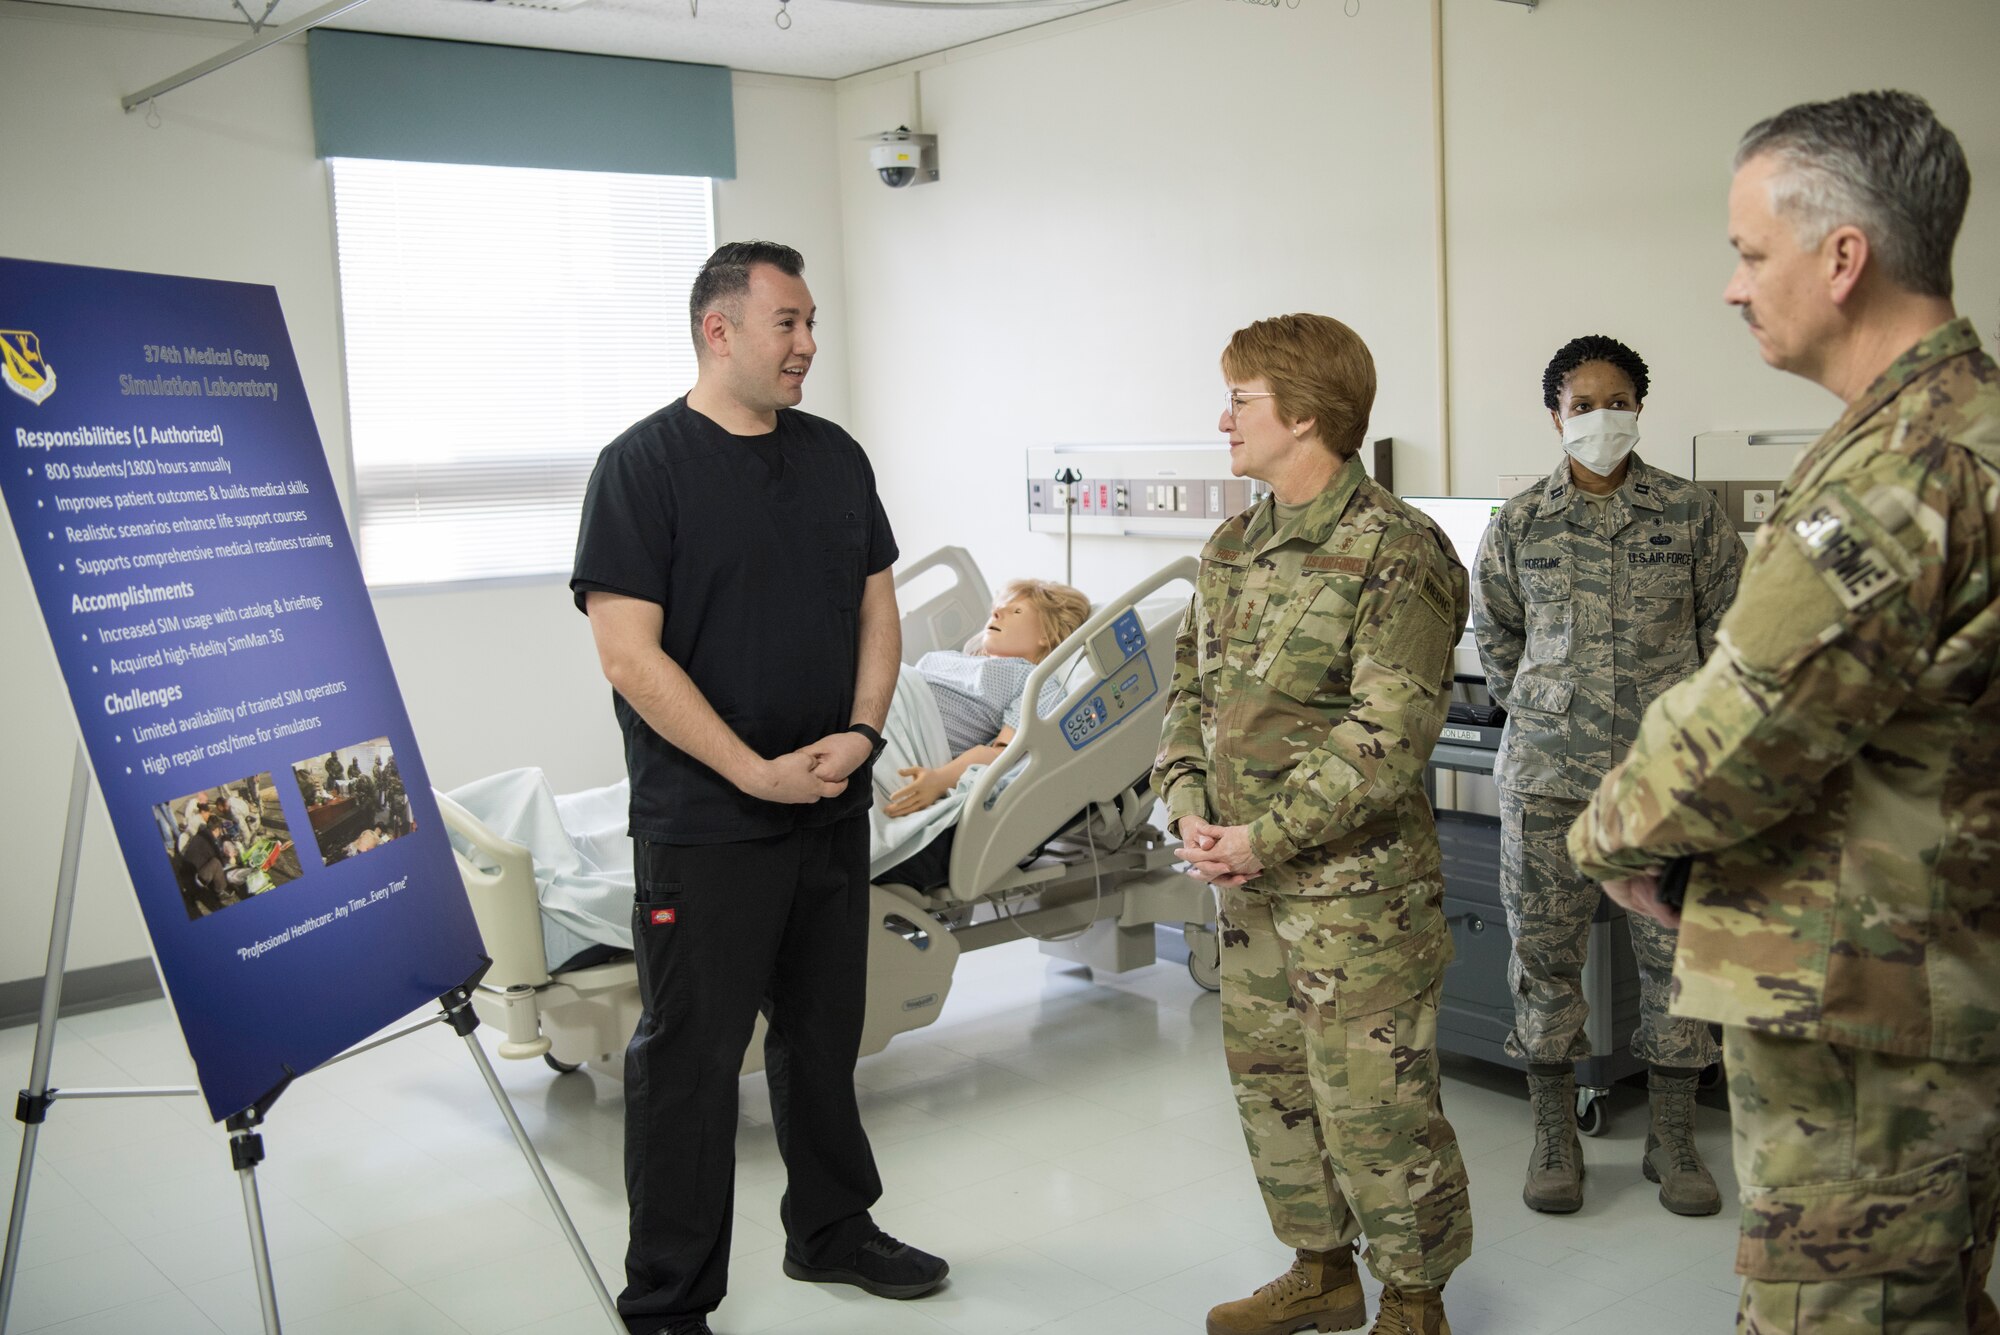 Lt. Gen. Dorothy Hogg, 23rd U.S. Air Force Surgeon General, and, Chief Master Sgt. G. Steve Cum, Chief of the Medical Enlisted Force meet with members of the 374th Medical Group Simulation Laboratory, Jan. 29, 2019, at Yokota Air Base, Japan.